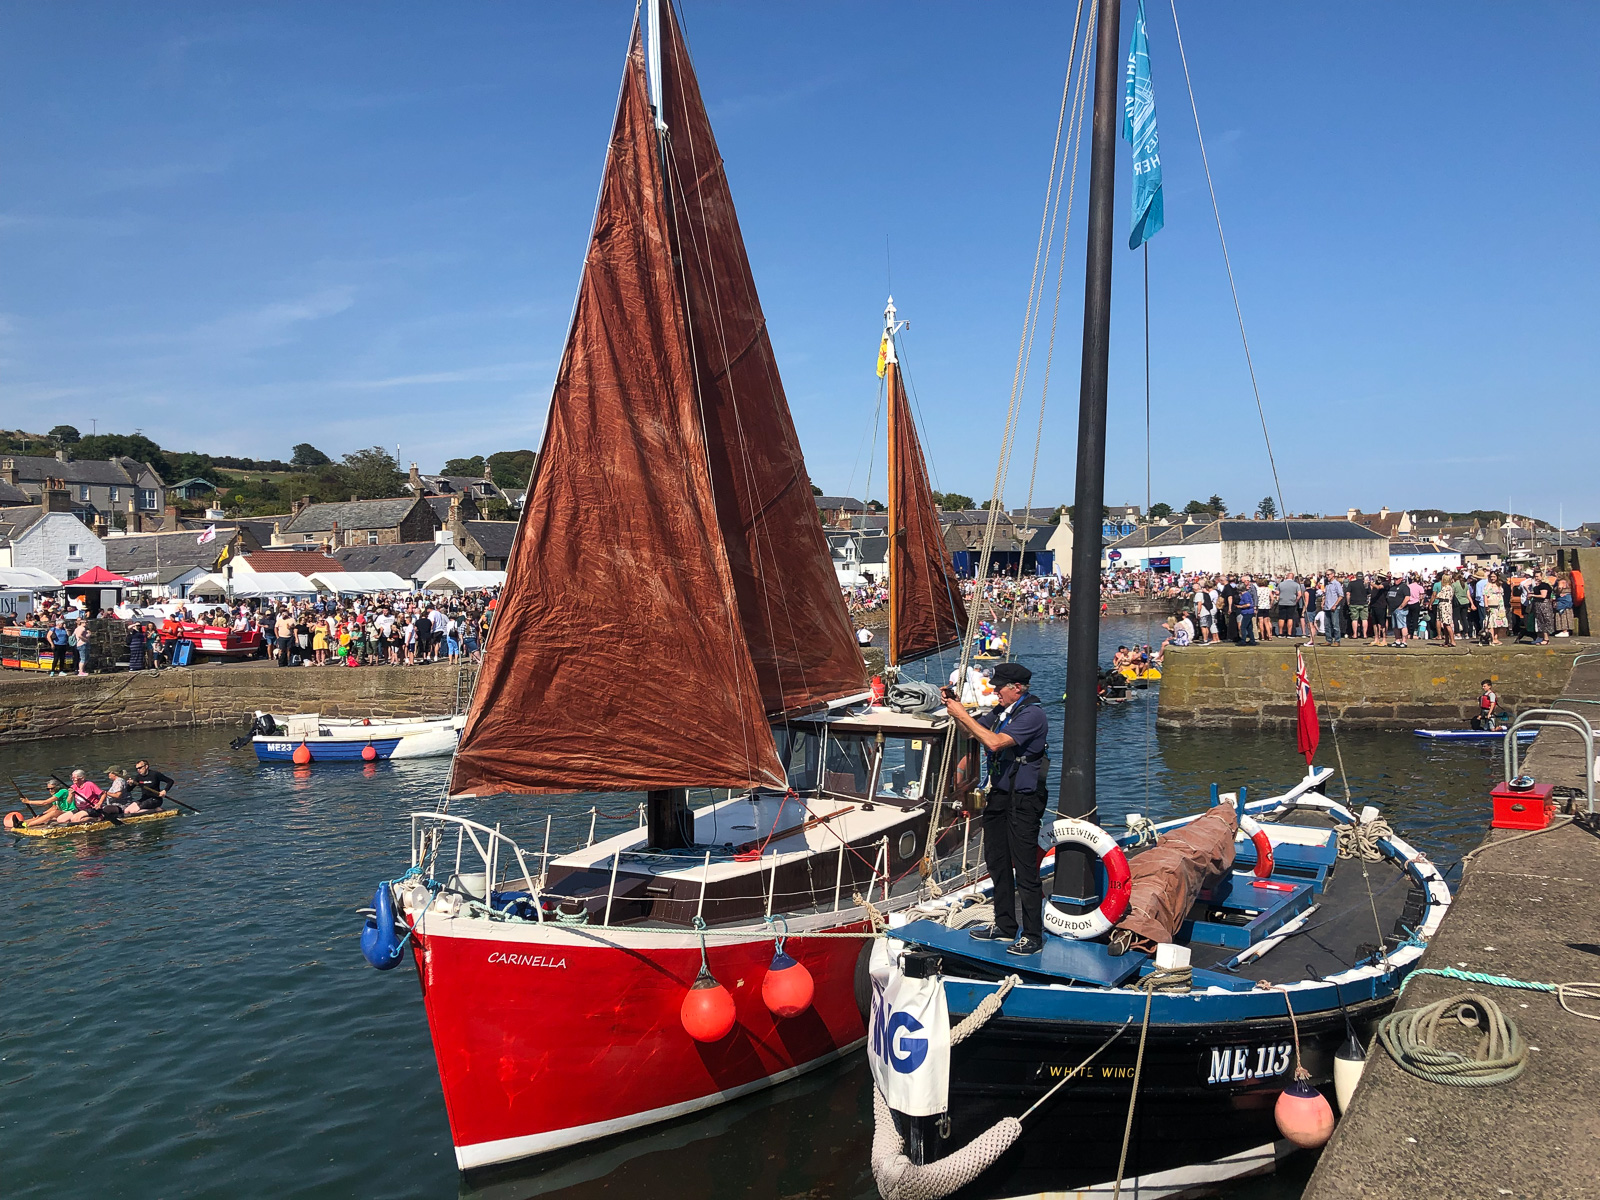 White Wing at the Johnshaven Fish Festival, August 2022